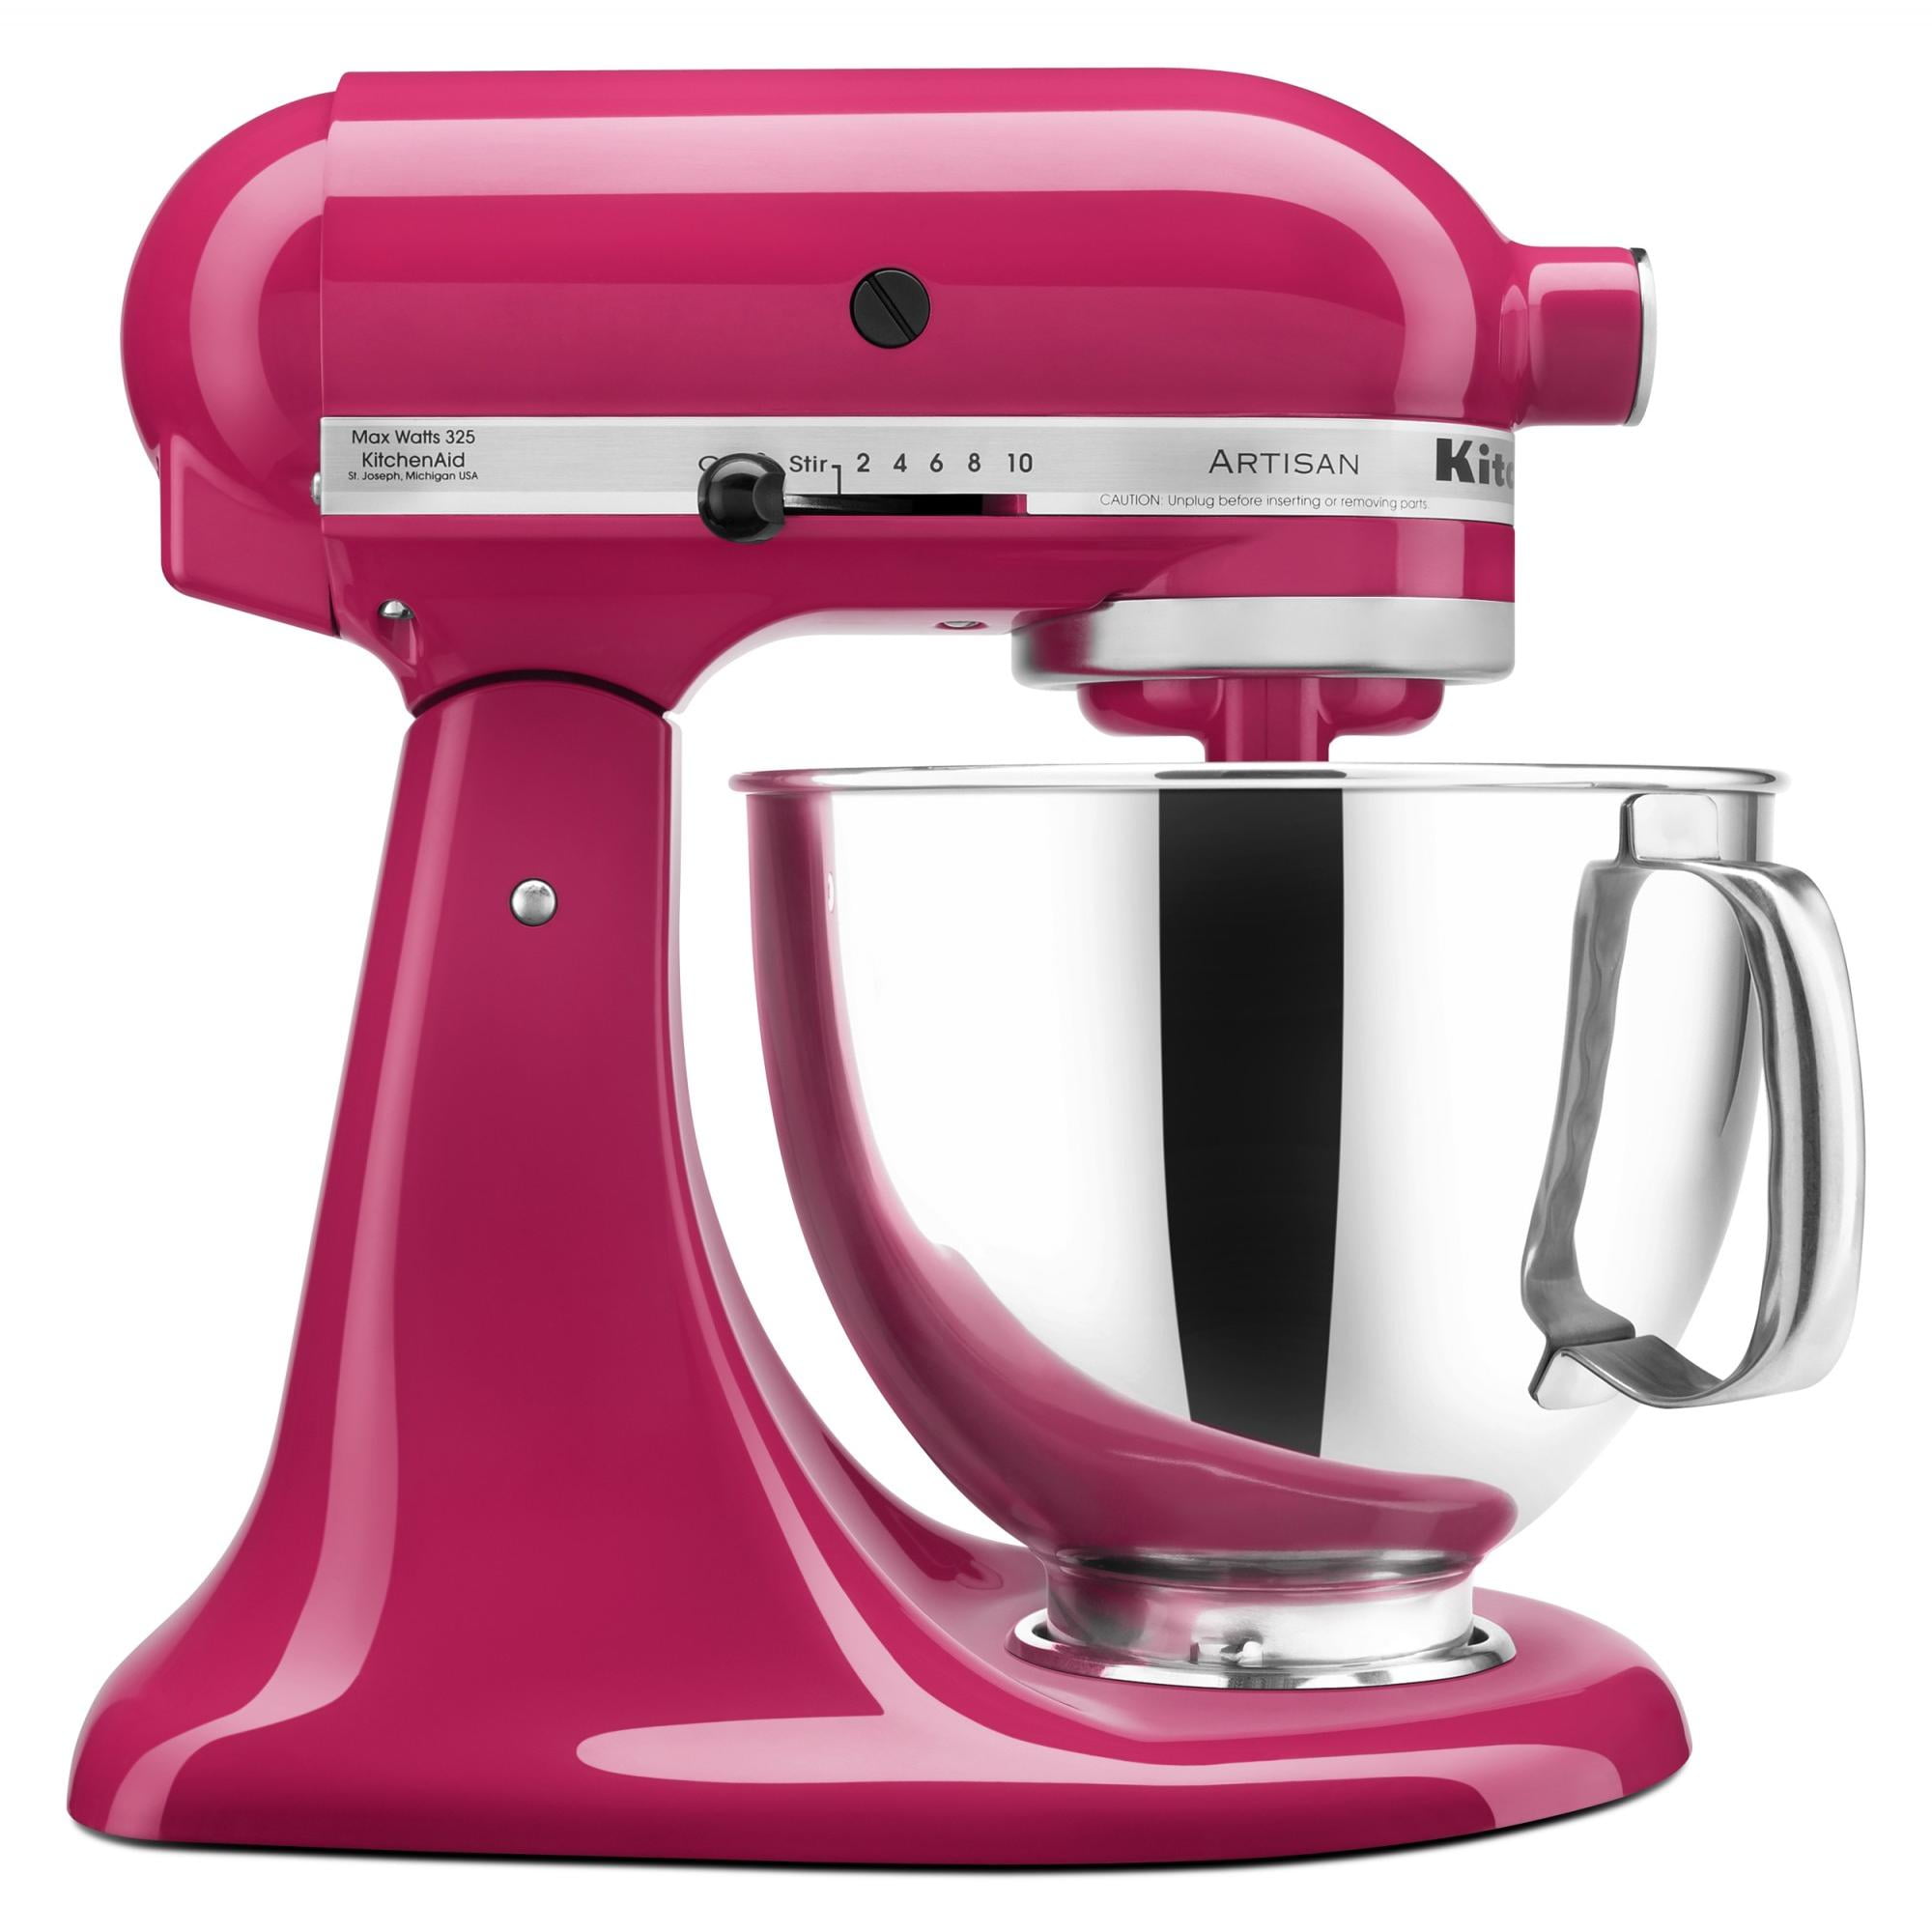 KitchenAid Artisan Mixer KSM150PS 5-Qt. With Accessories for Sale